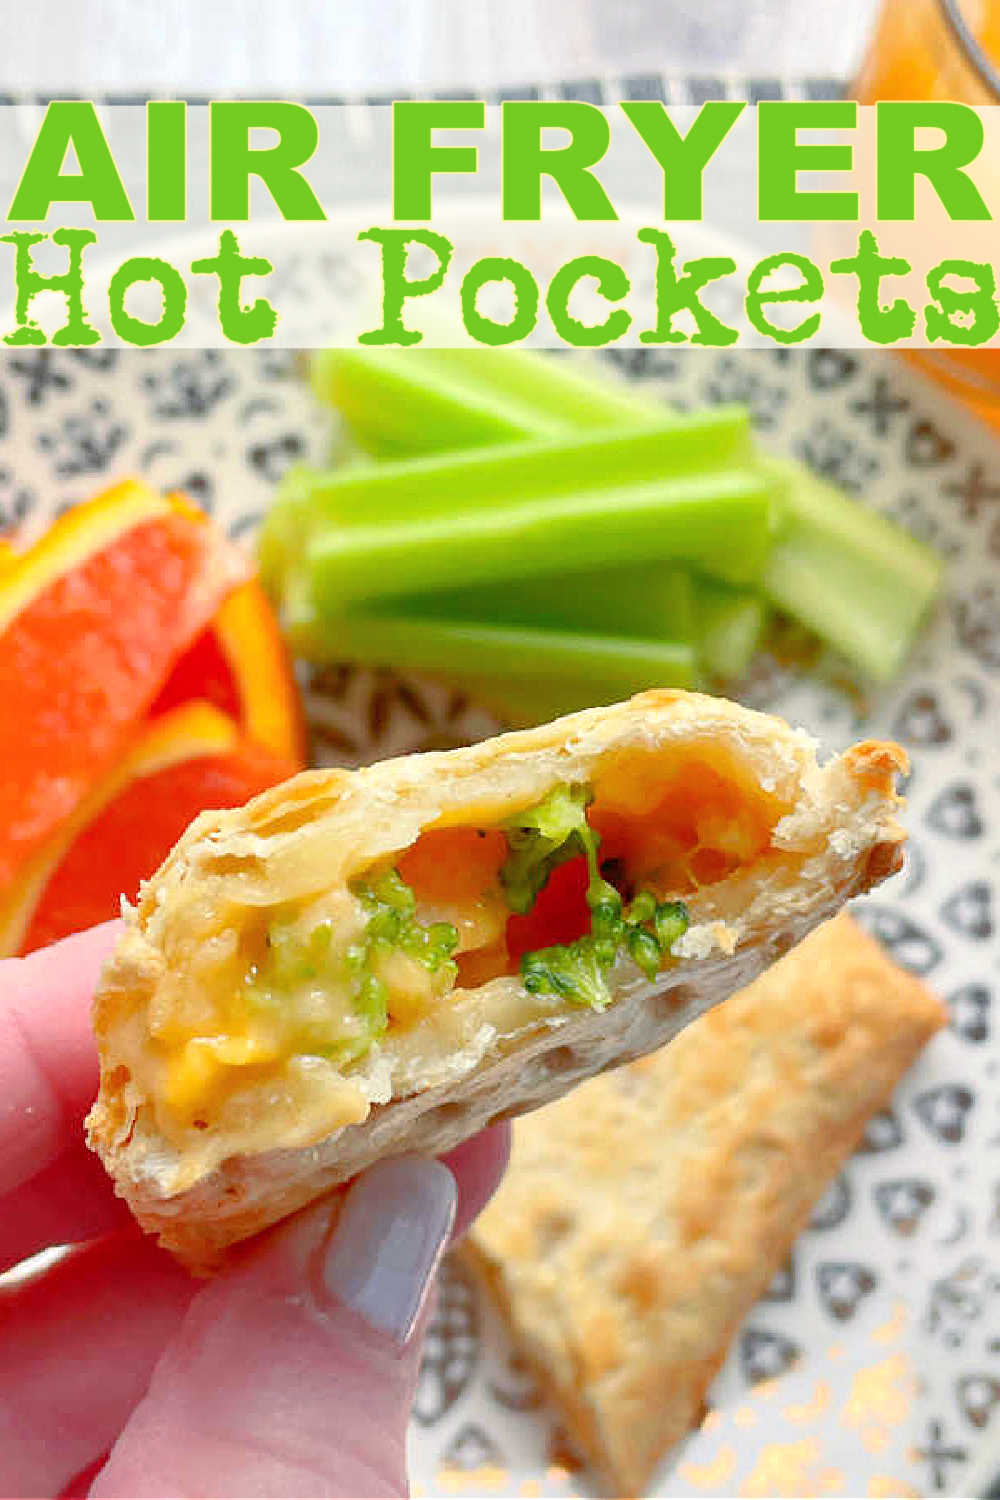 hot pocket cut in half to show chicken broccoli and cheddar filling